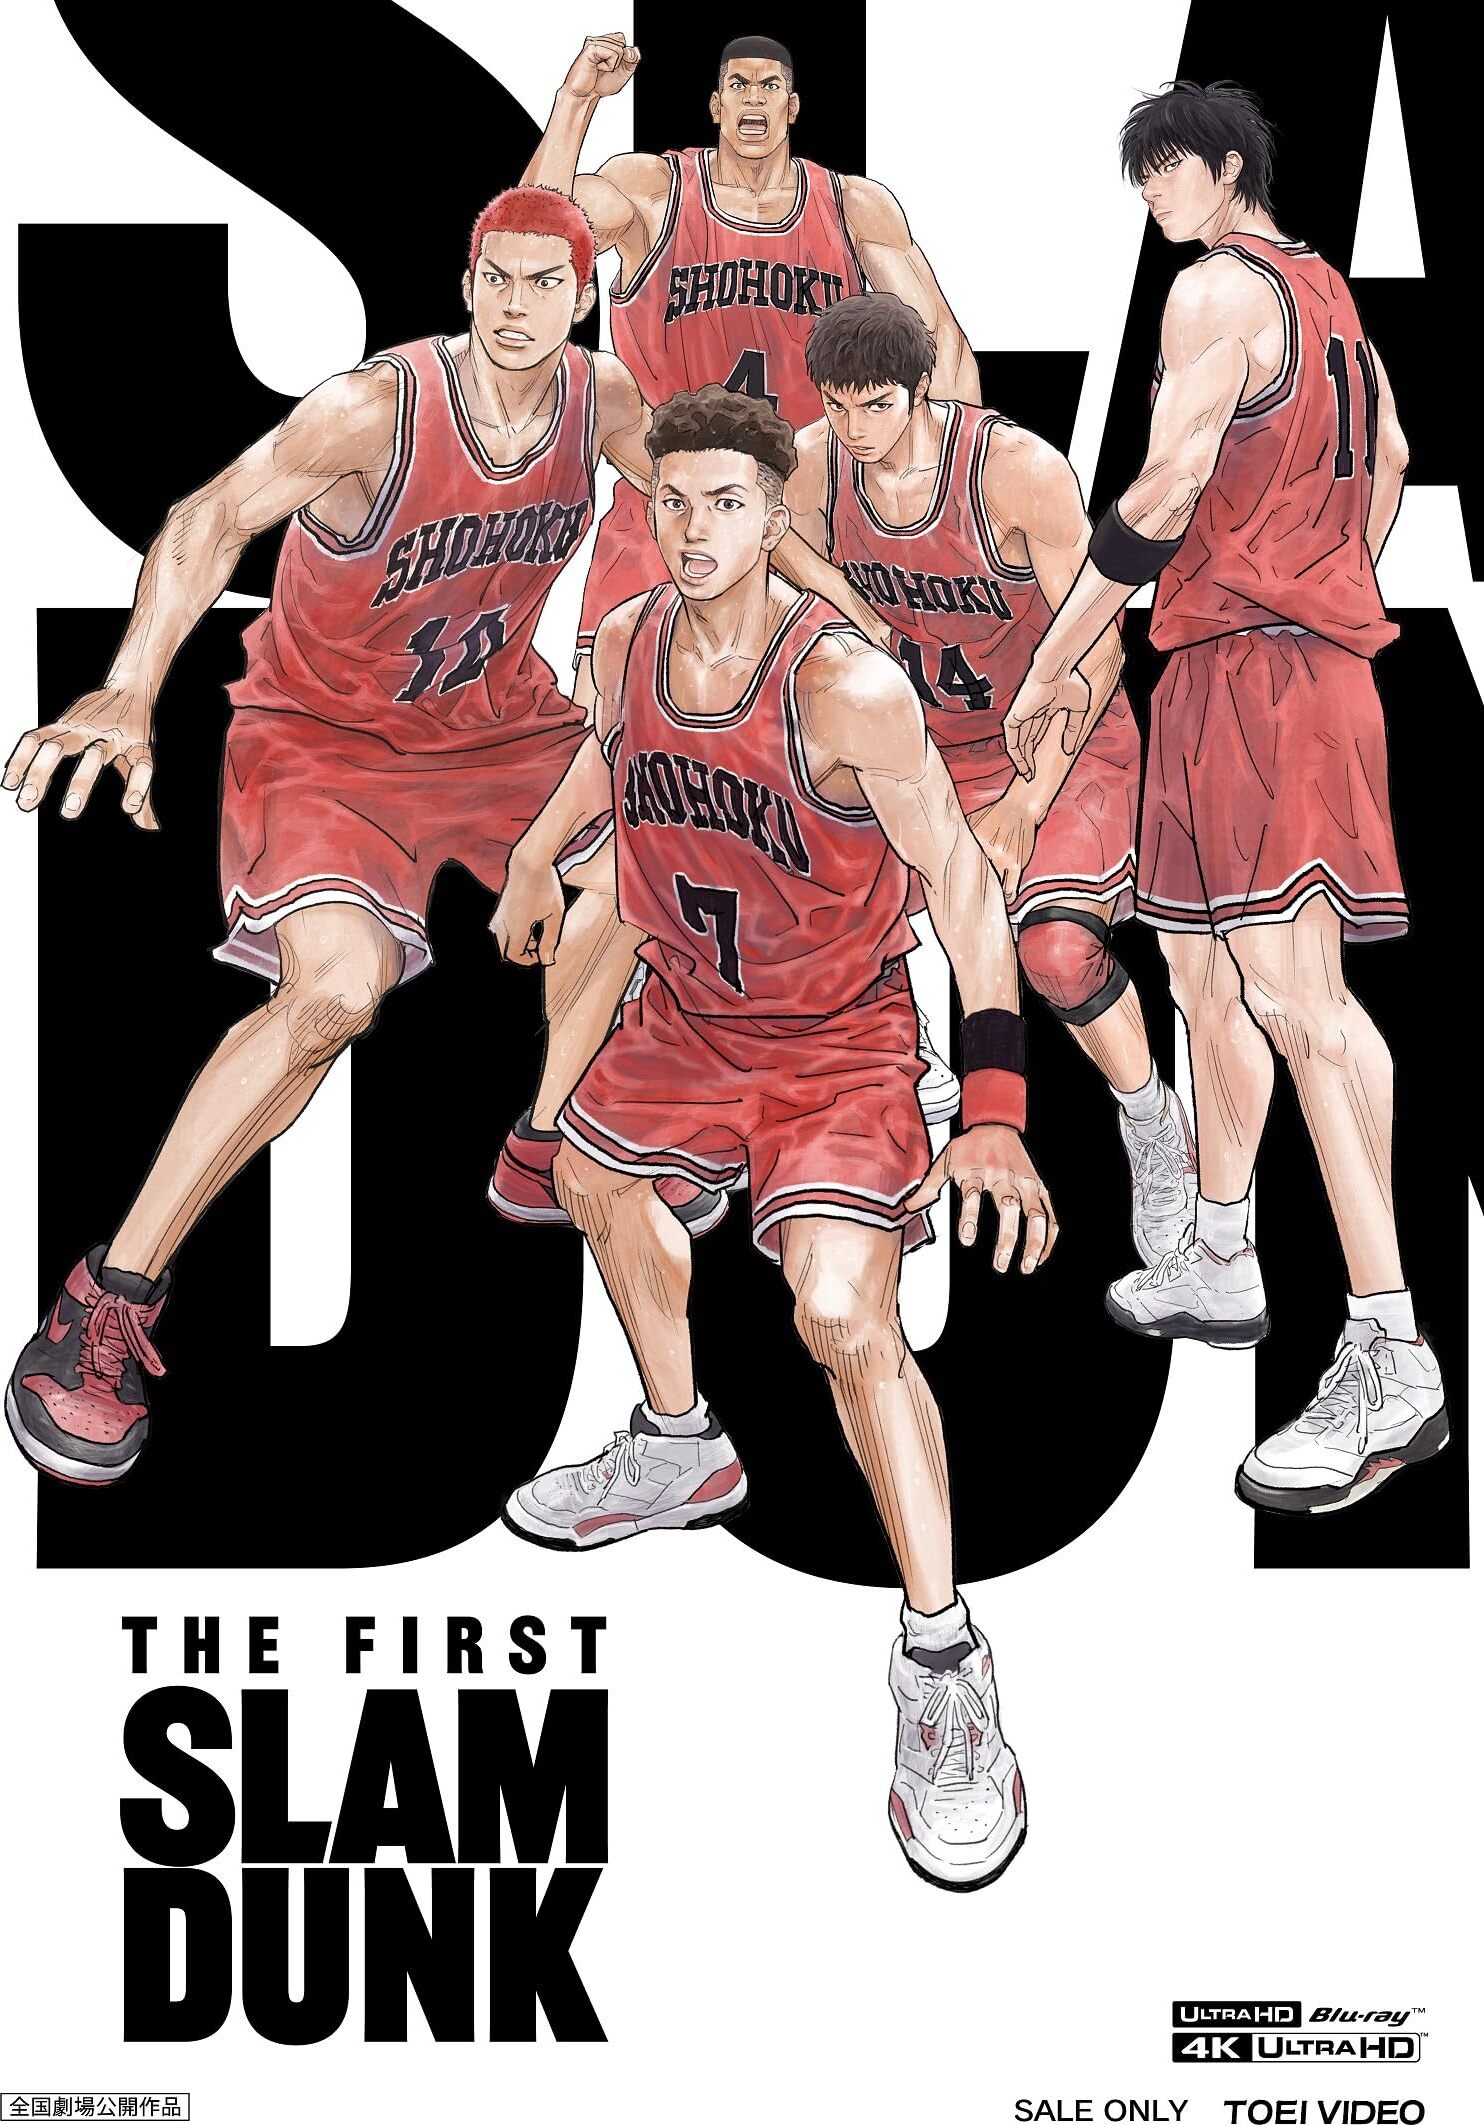 The First Slam Dunk 4K Blu-ray (Amazon Exclusive) (Japan)